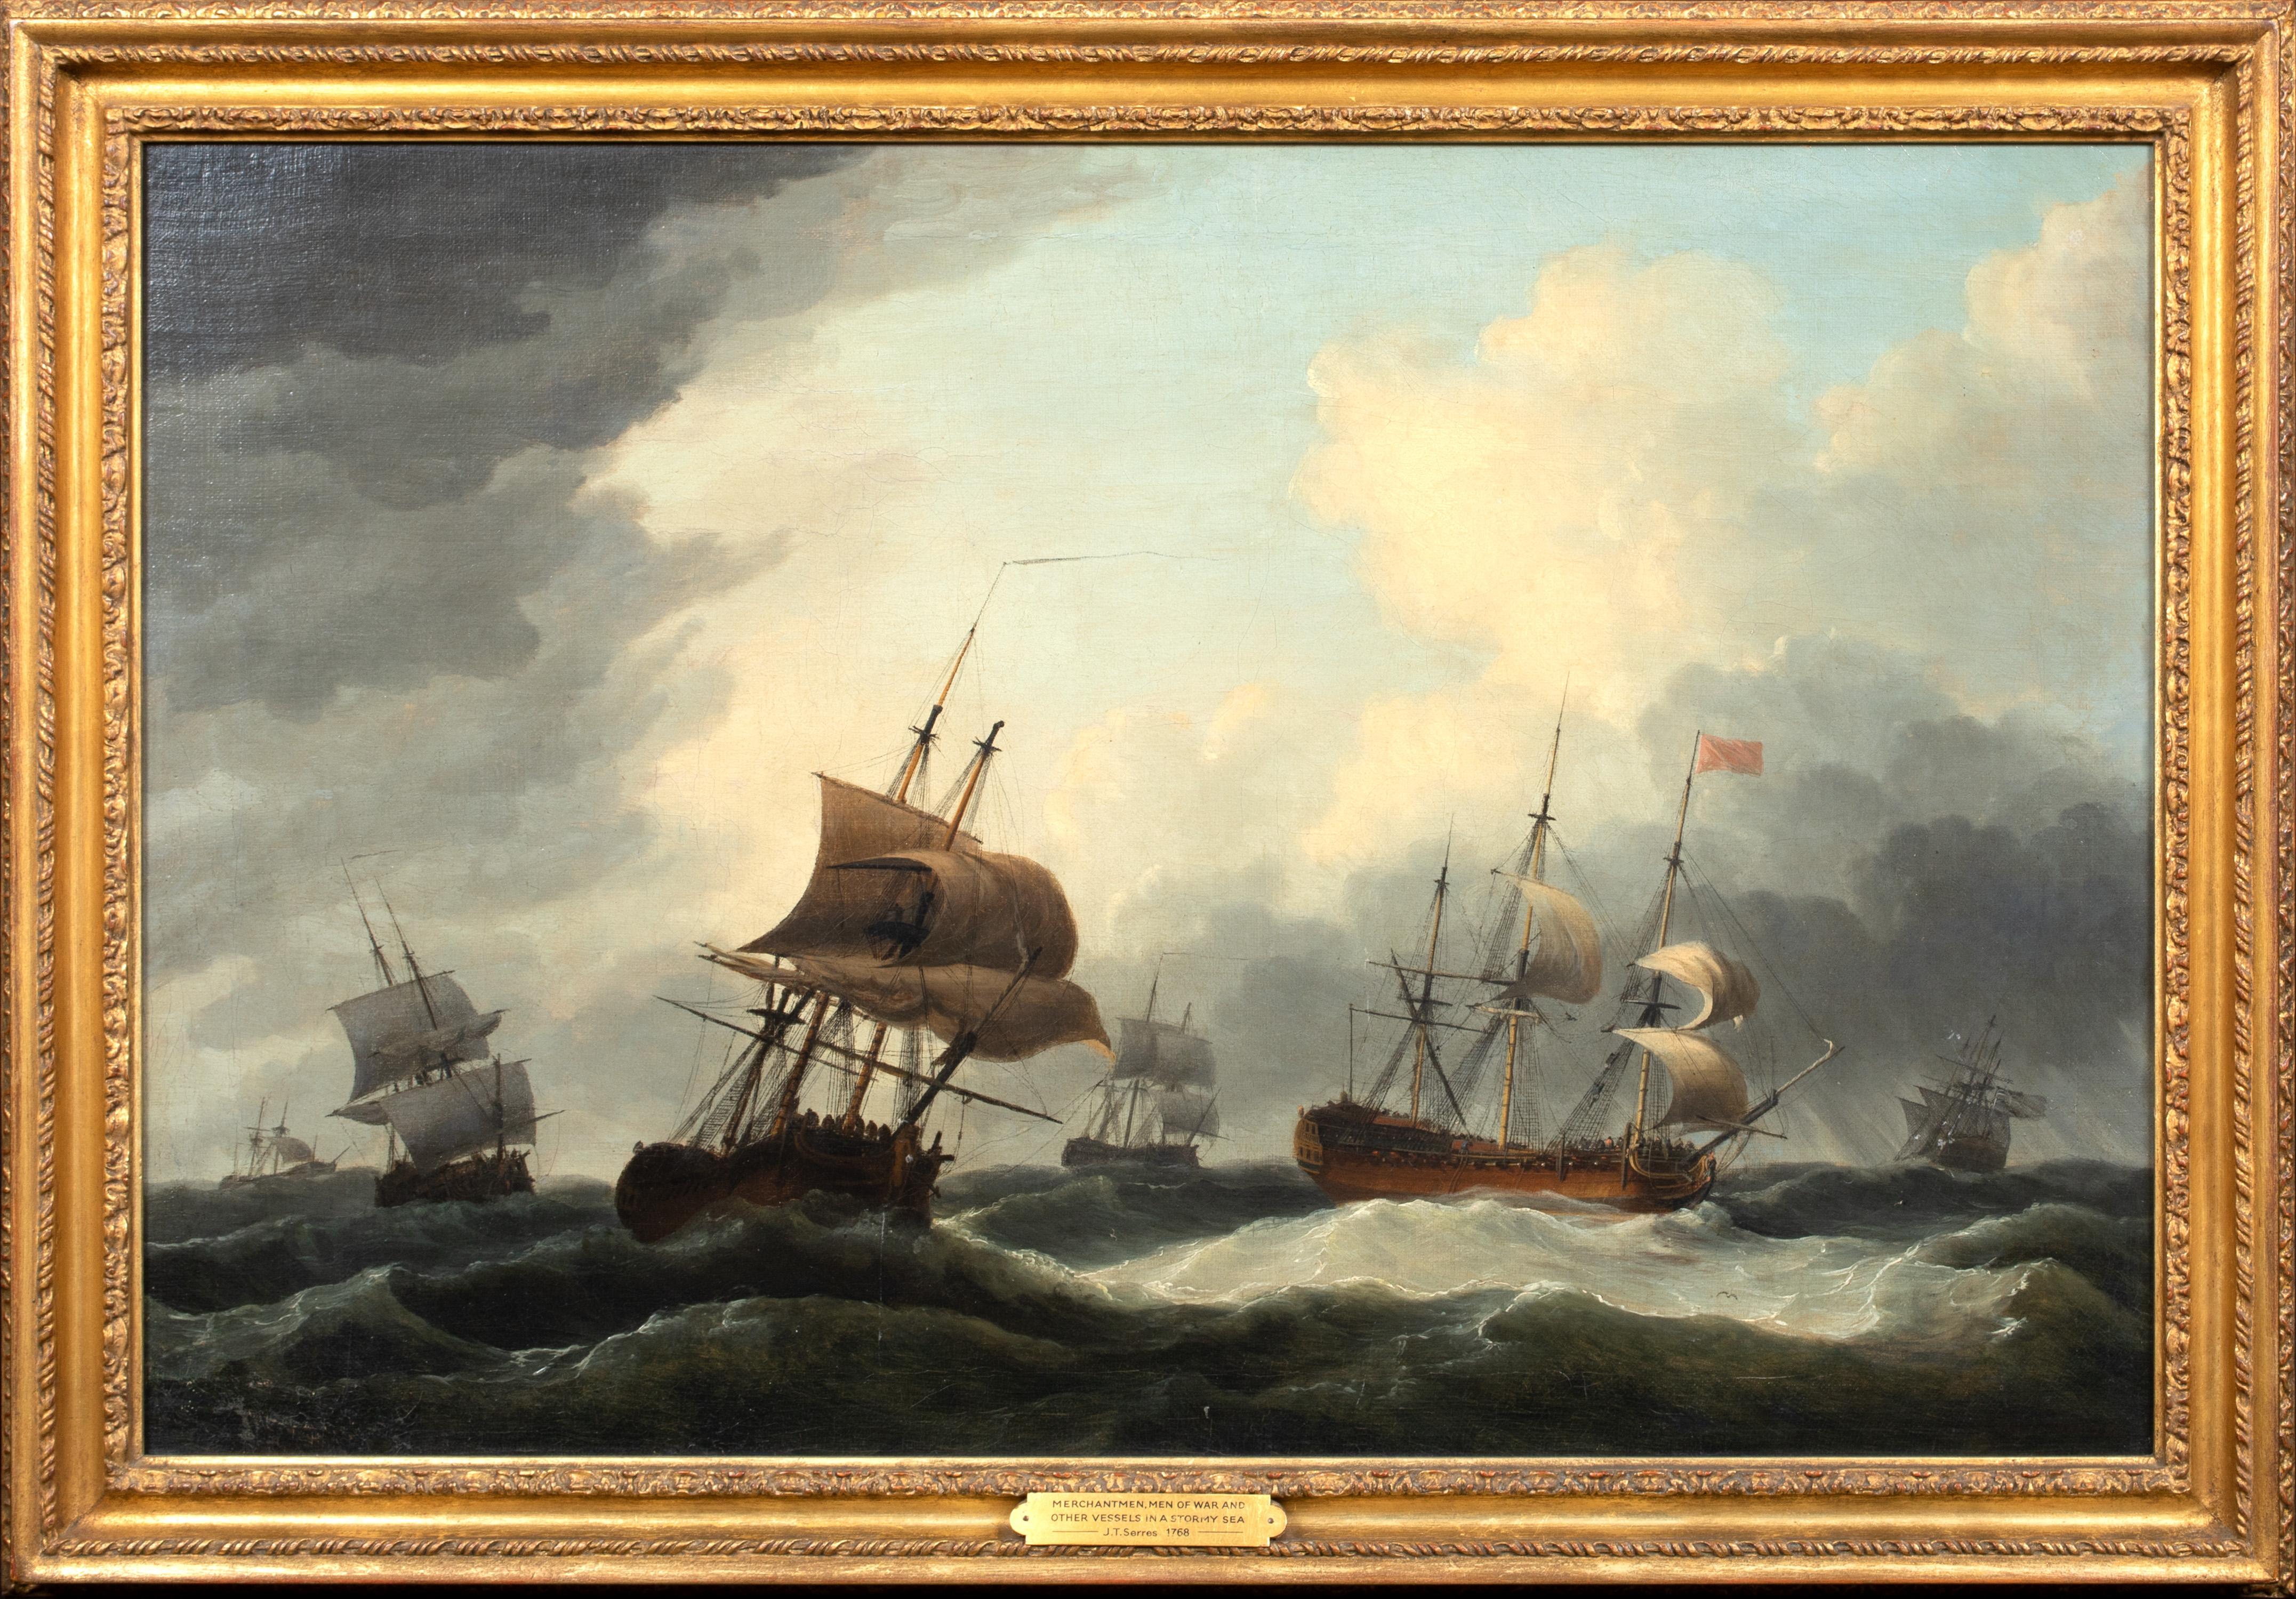 John Thomas Serres Portrait Painting - Merchantmen, Men O'war and other vessels in a stormy sea, 18th Century